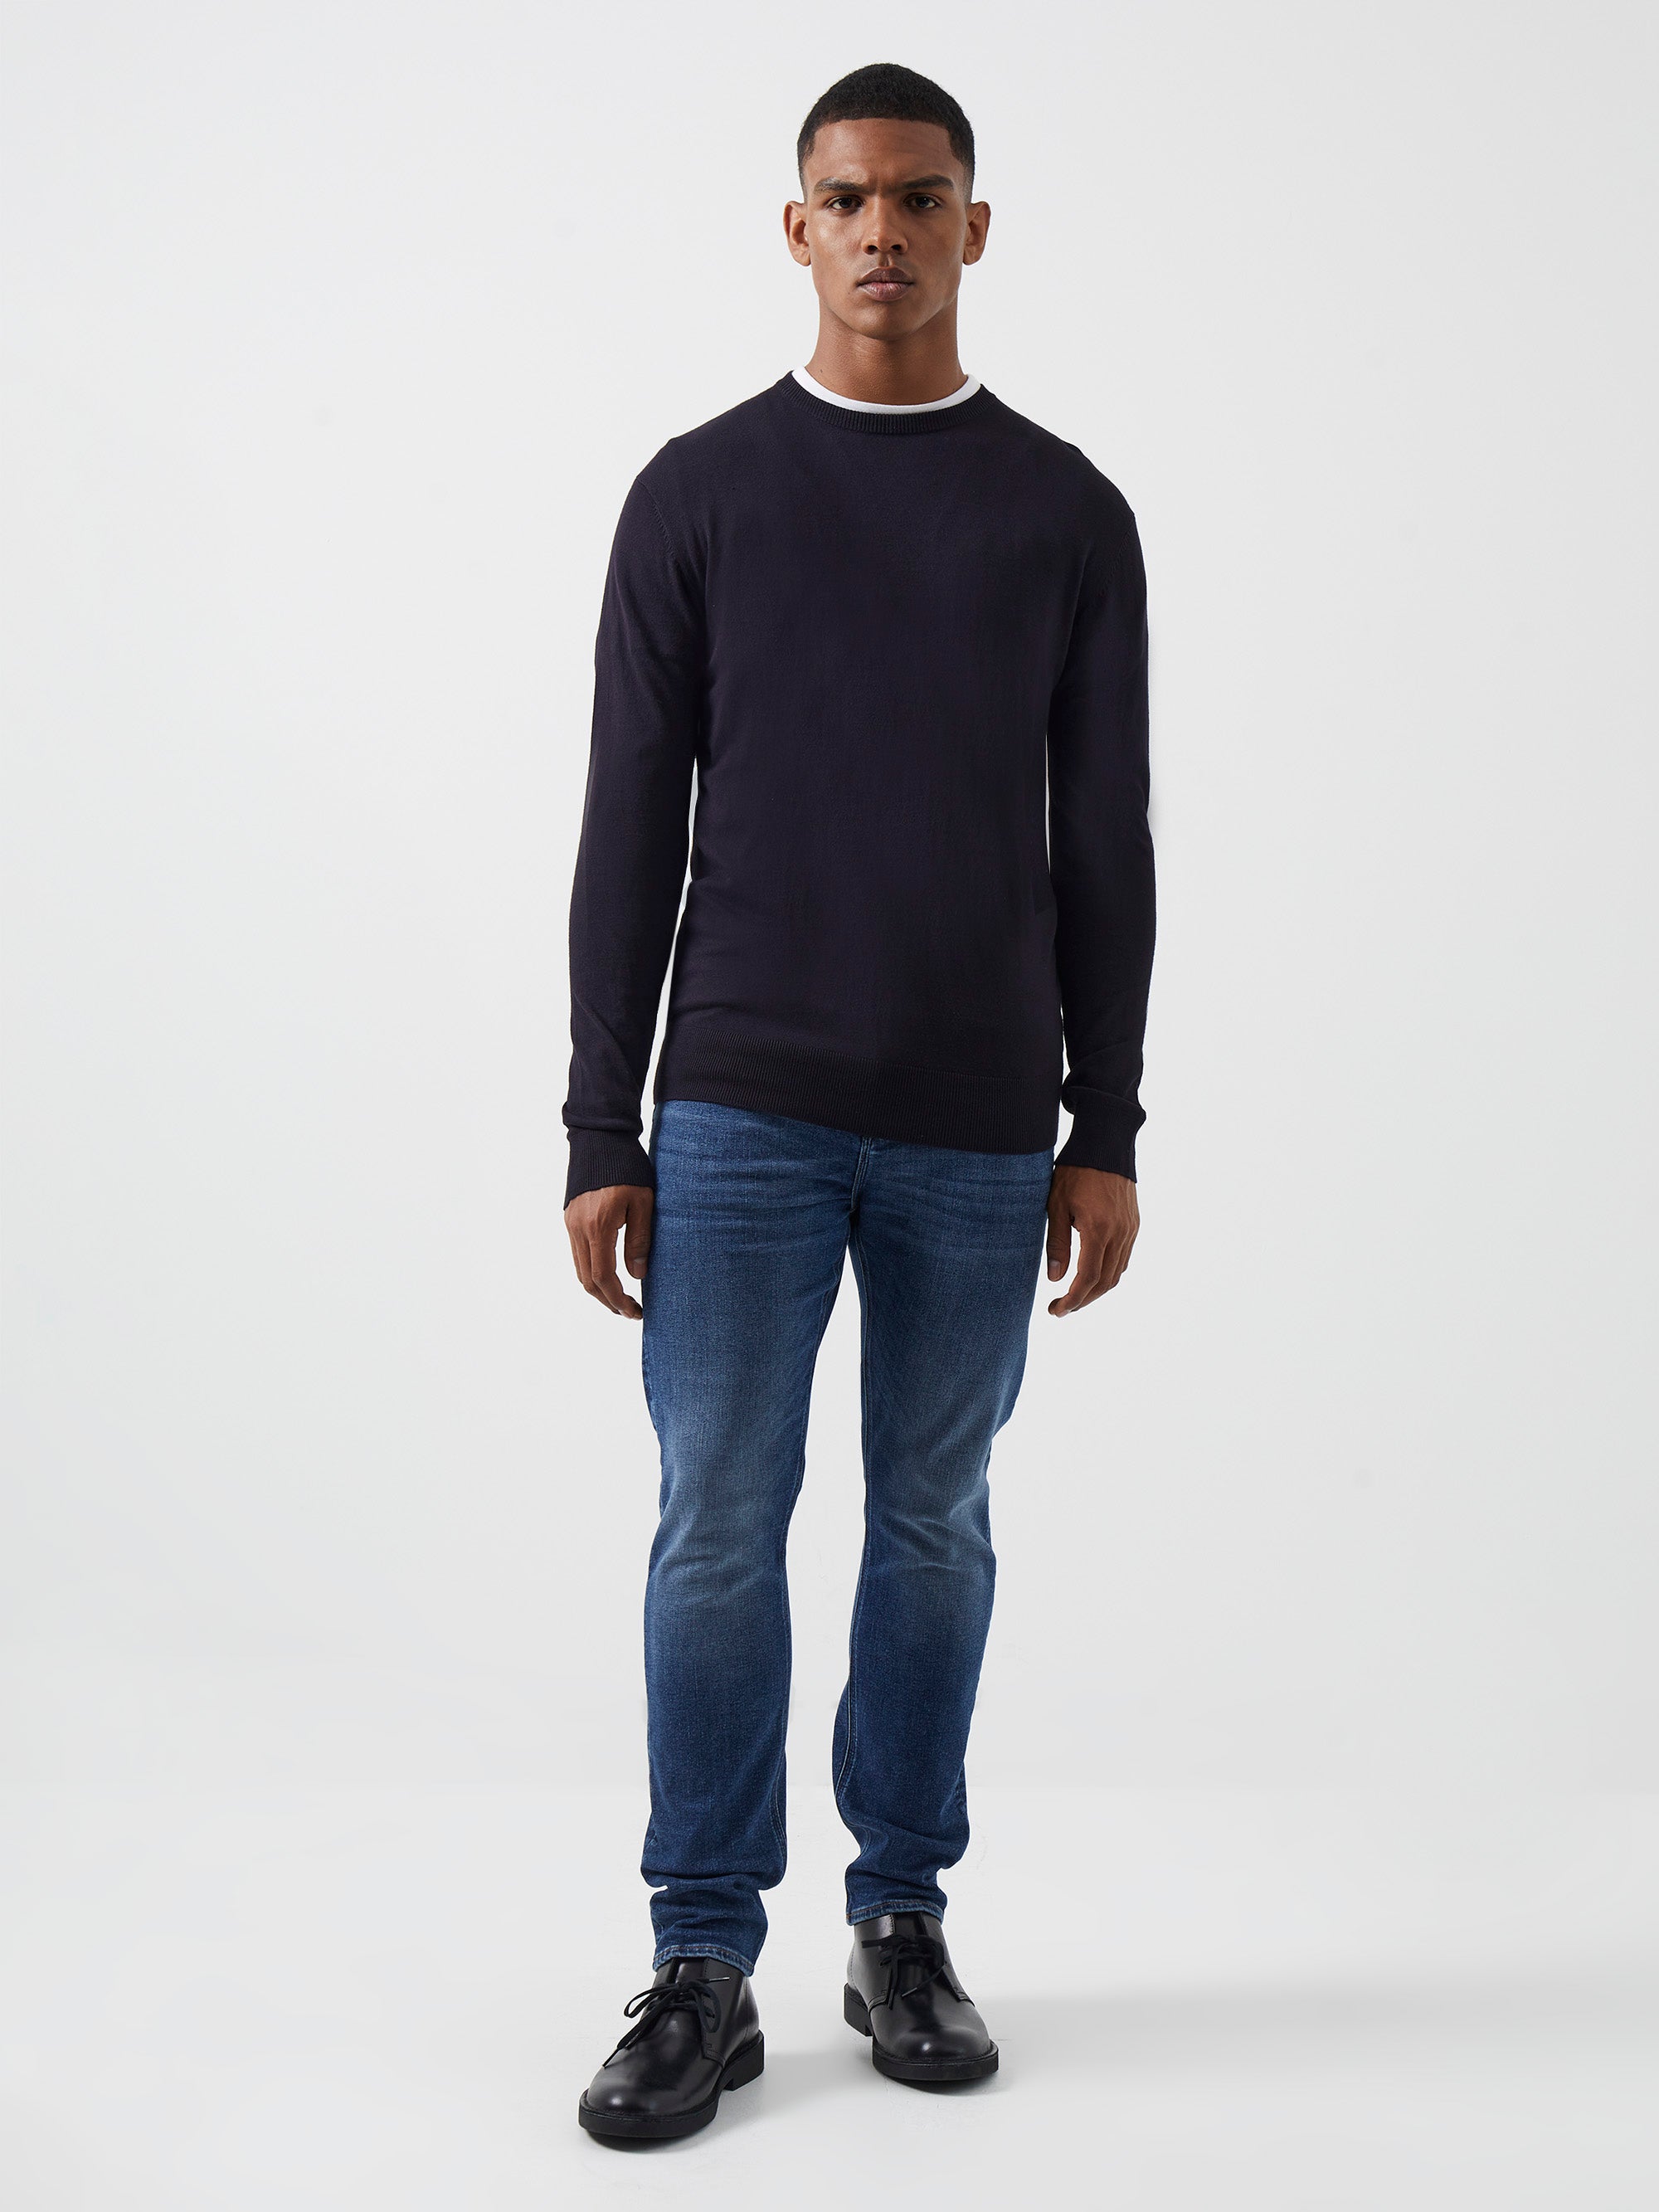 Crew Neck Knit Jumper Charcoal Mel | French Connection UK